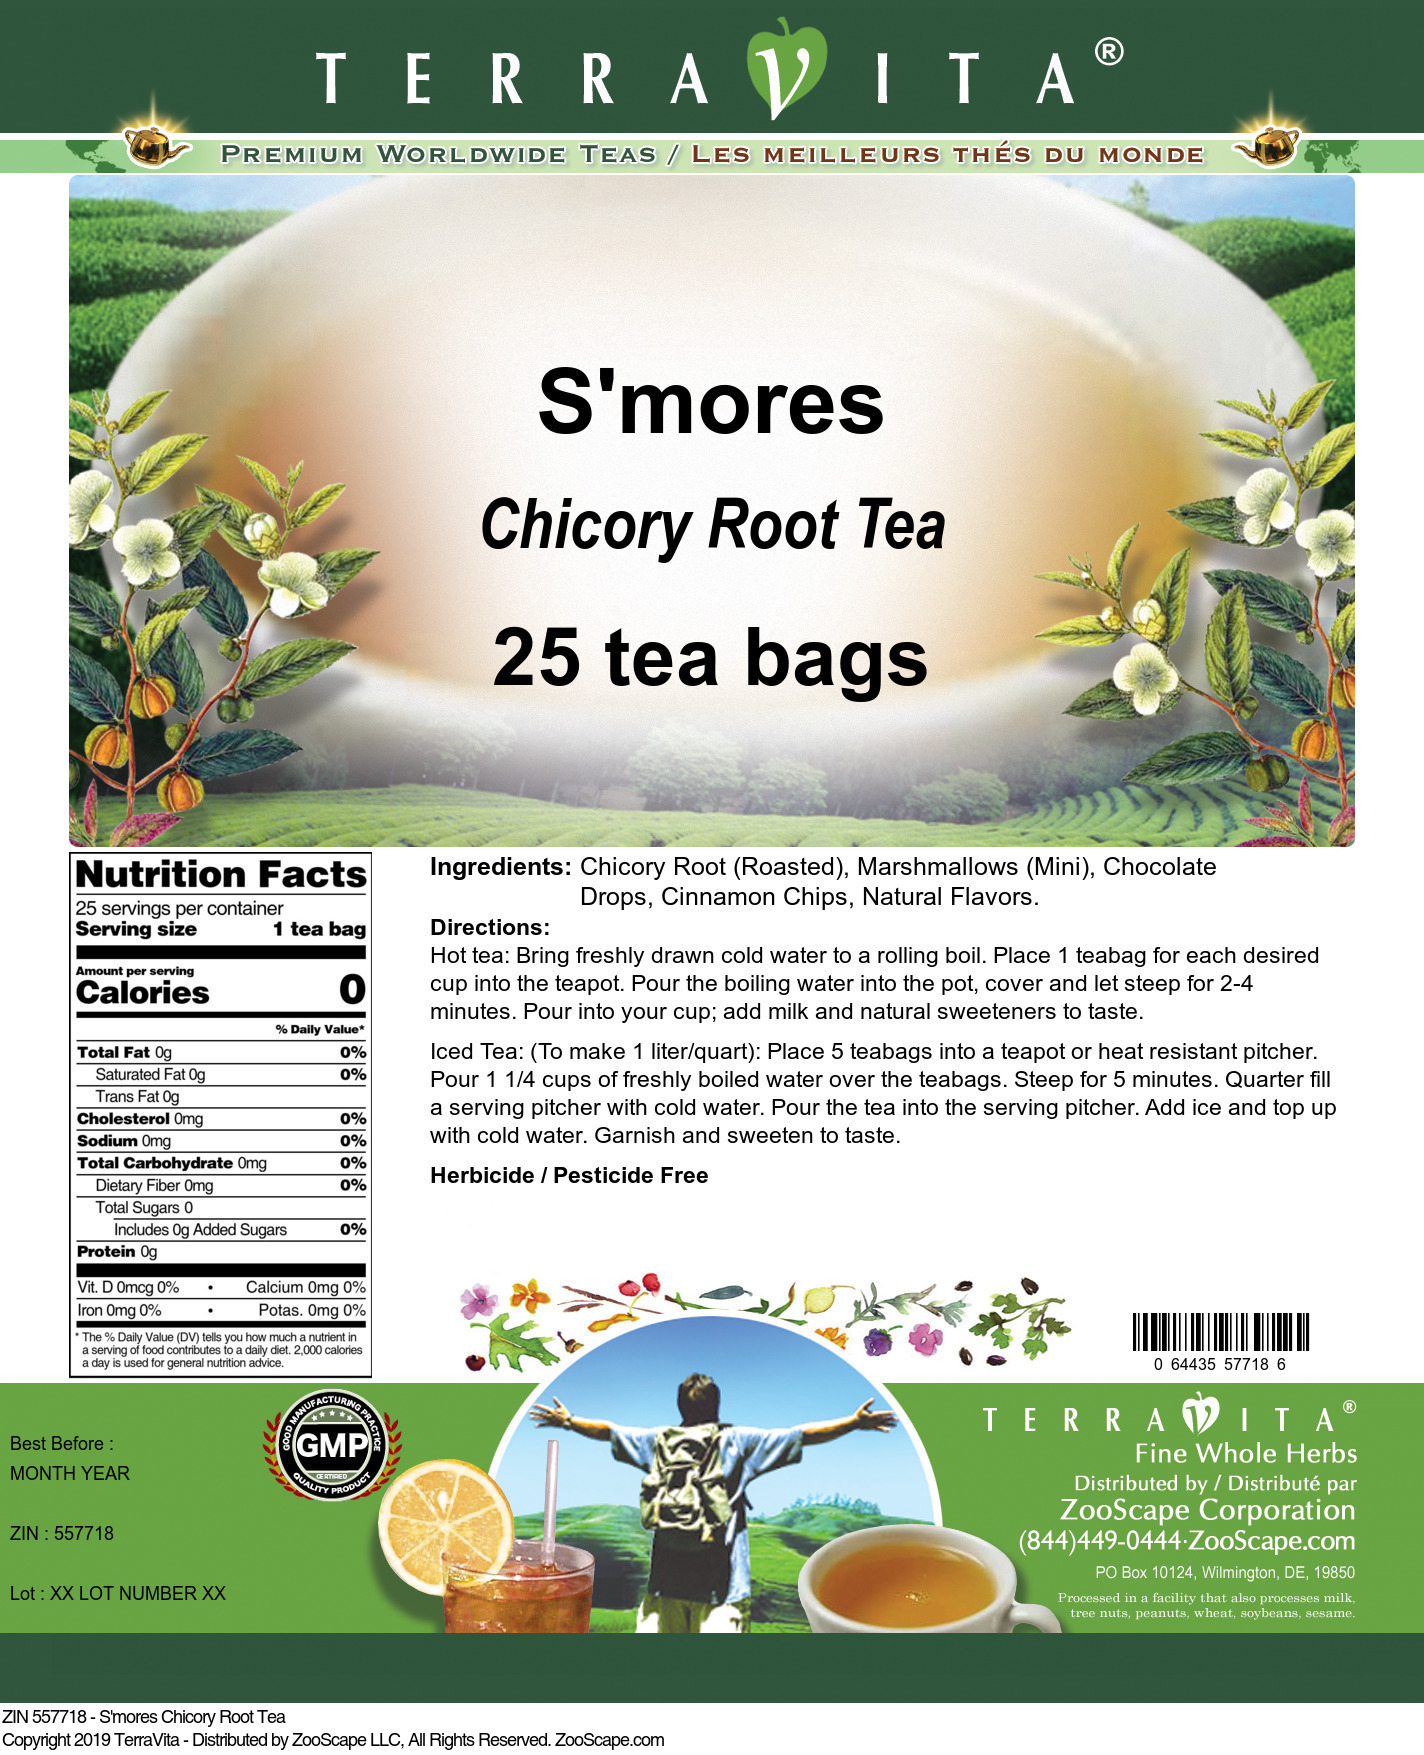 S'mores Chicory Root Tea - Label